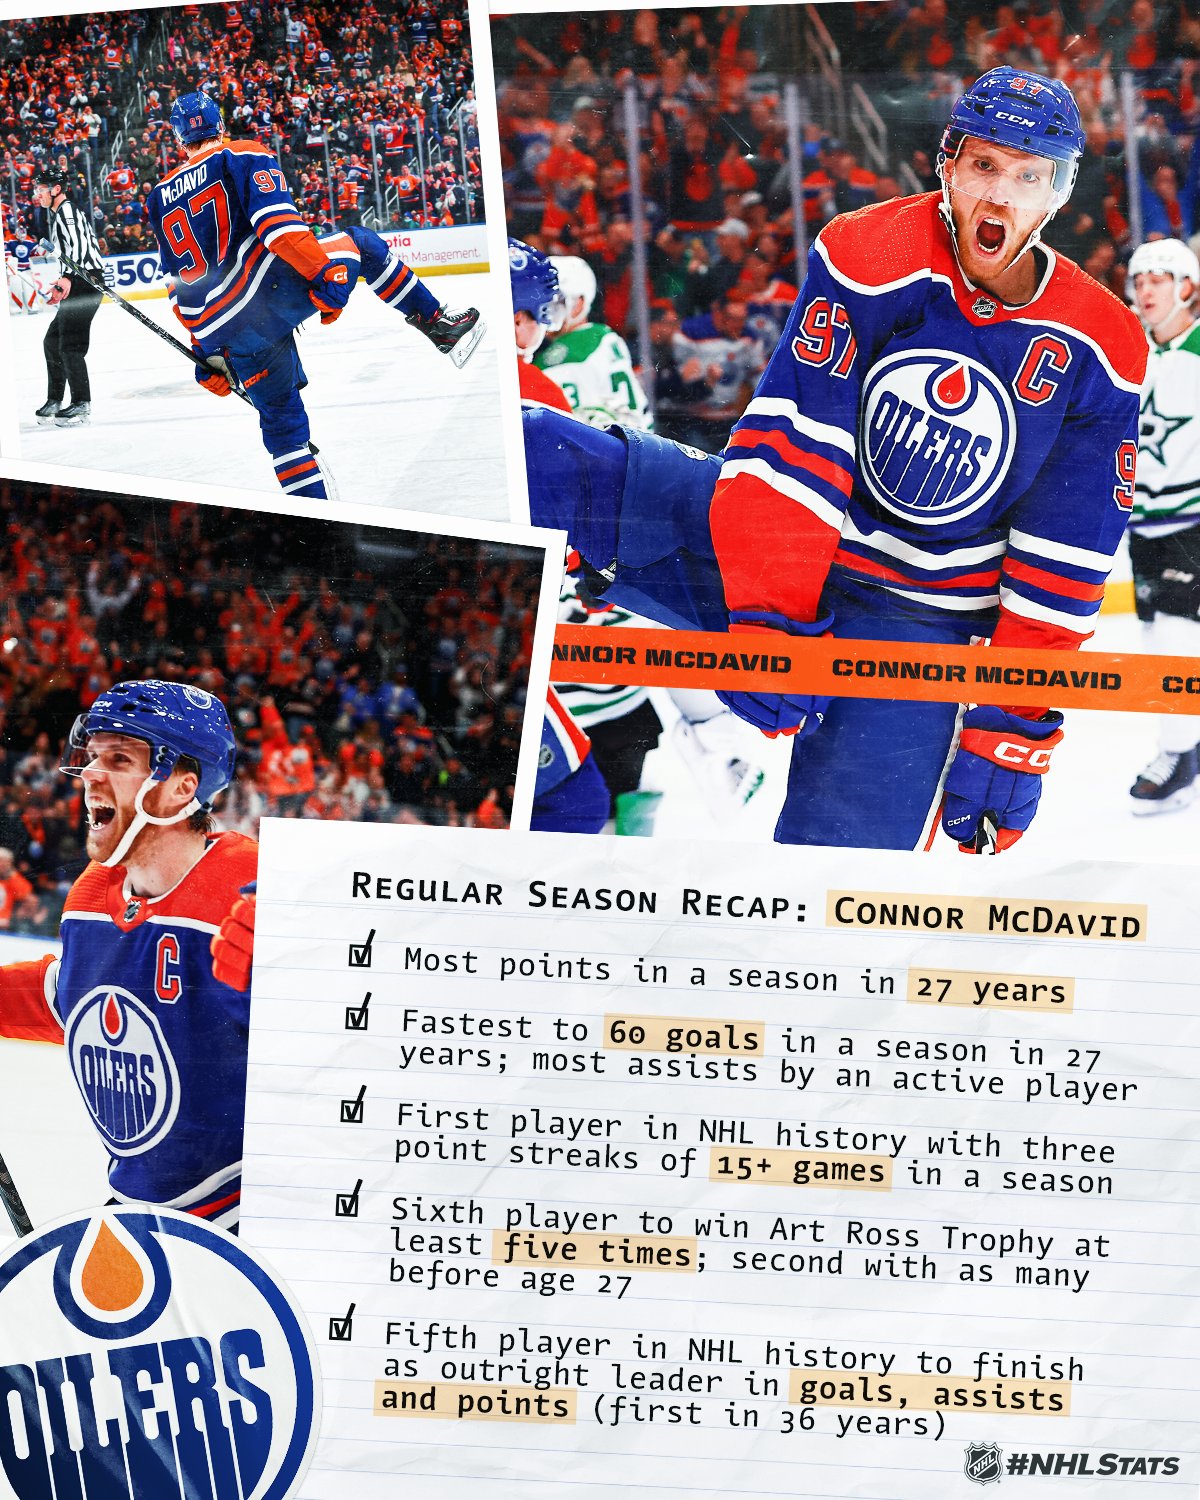 Top rookie cards of NHL superstar Connor McDavid - Sports